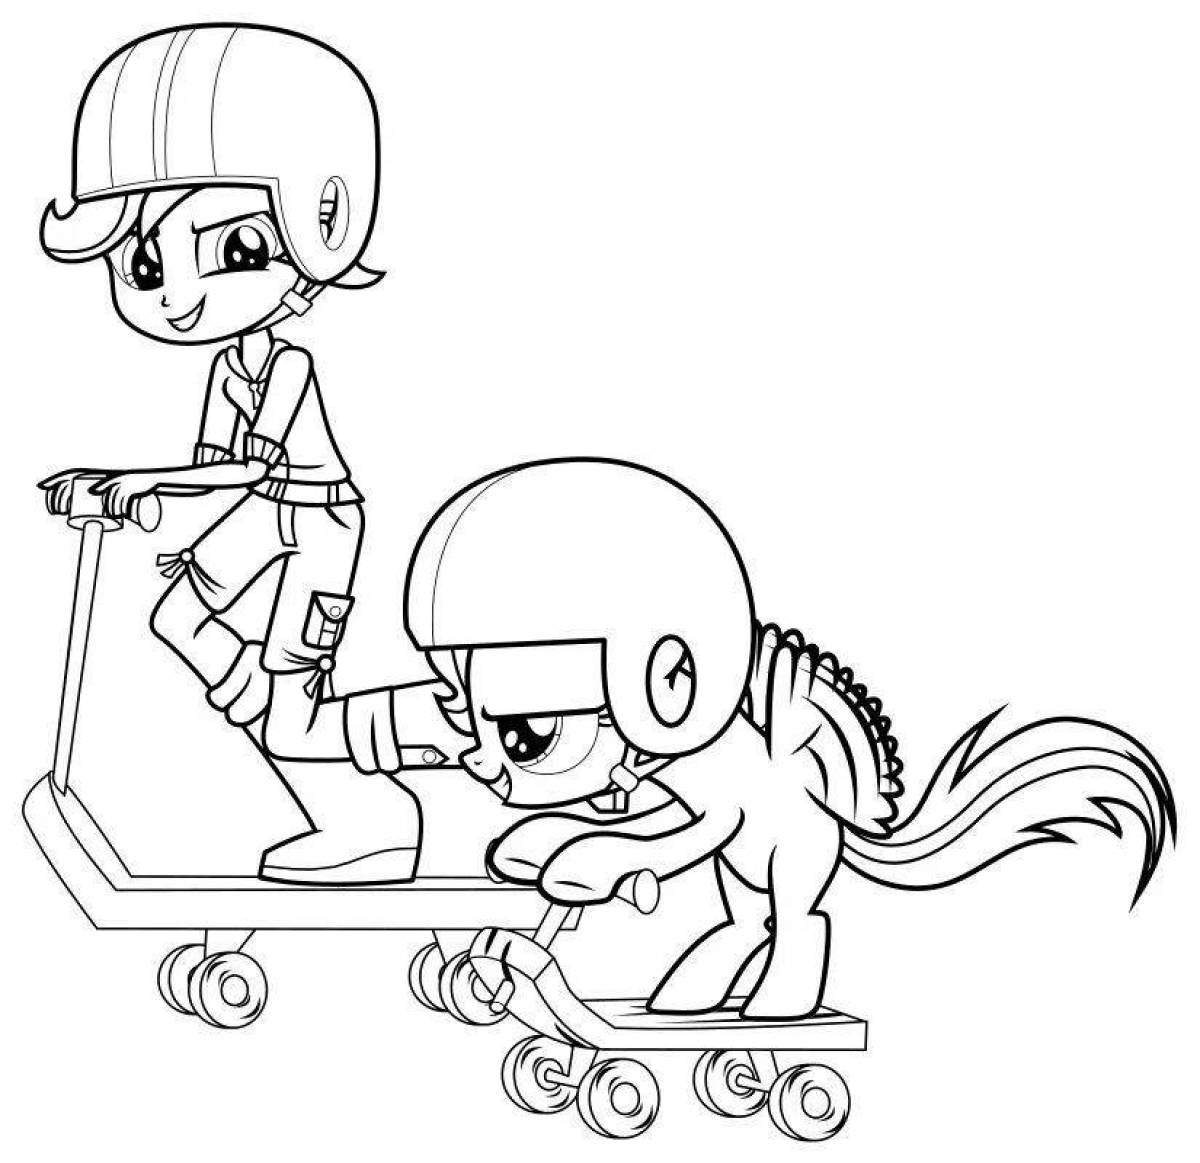 Coloring page wild pony play time